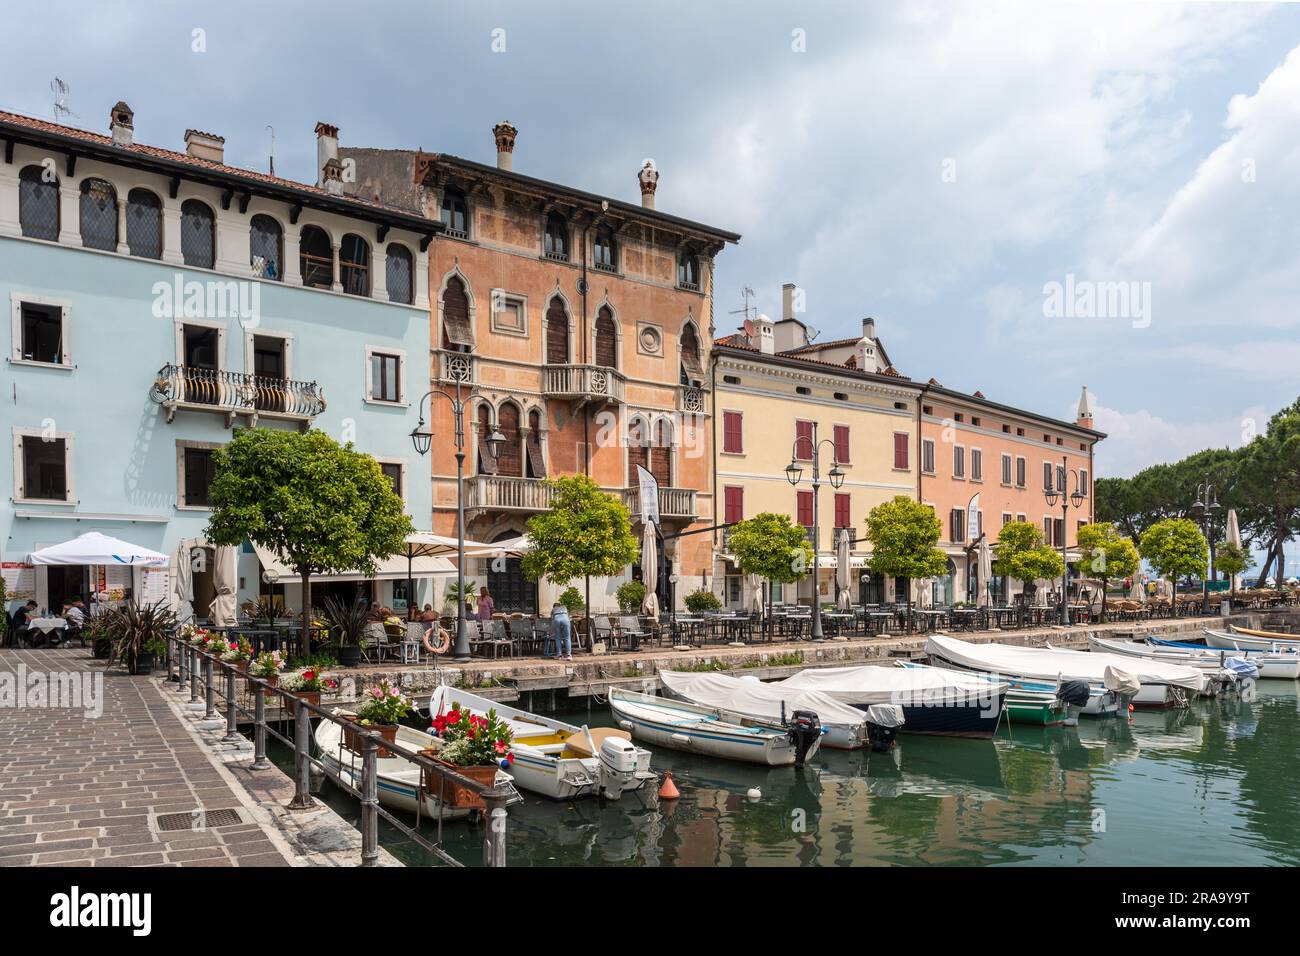 Little harbour called the old harbour lined with street cafes and restaurants, Desenzano, Lake Garda, Italy, Europe Stock Photo